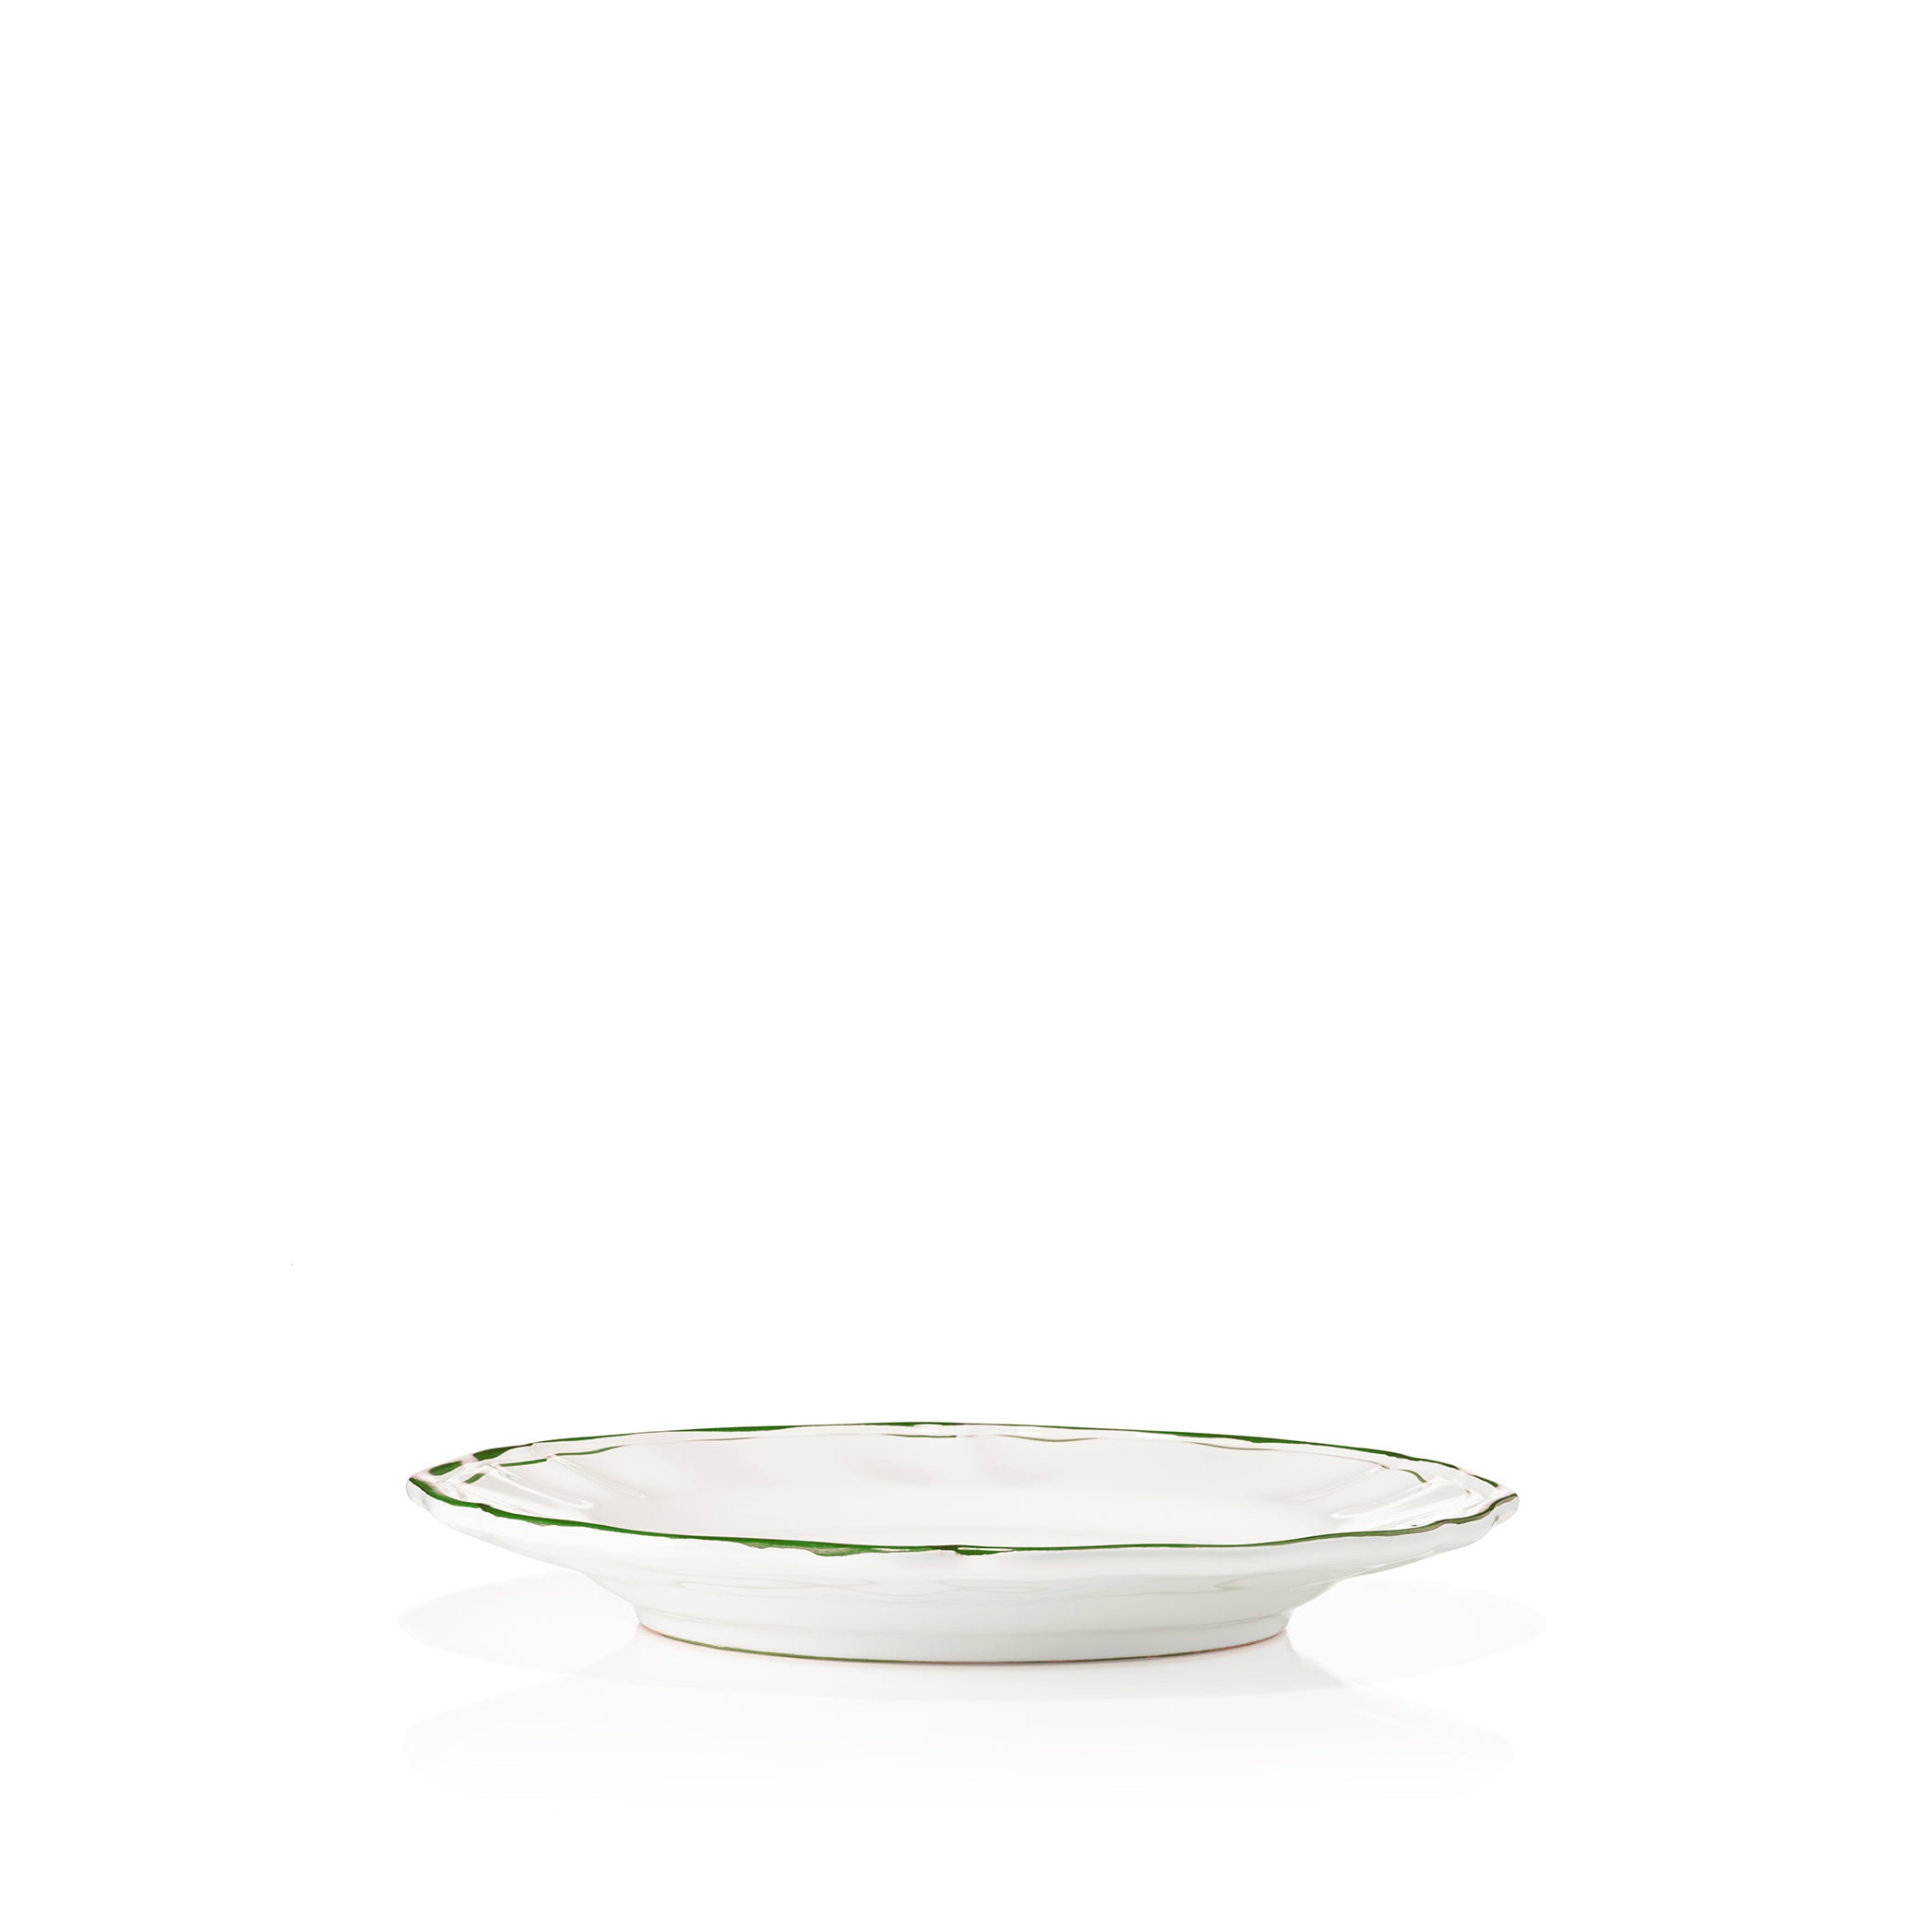 Scalloped Dinner Plate With Olive Green Double Rim, 28cm